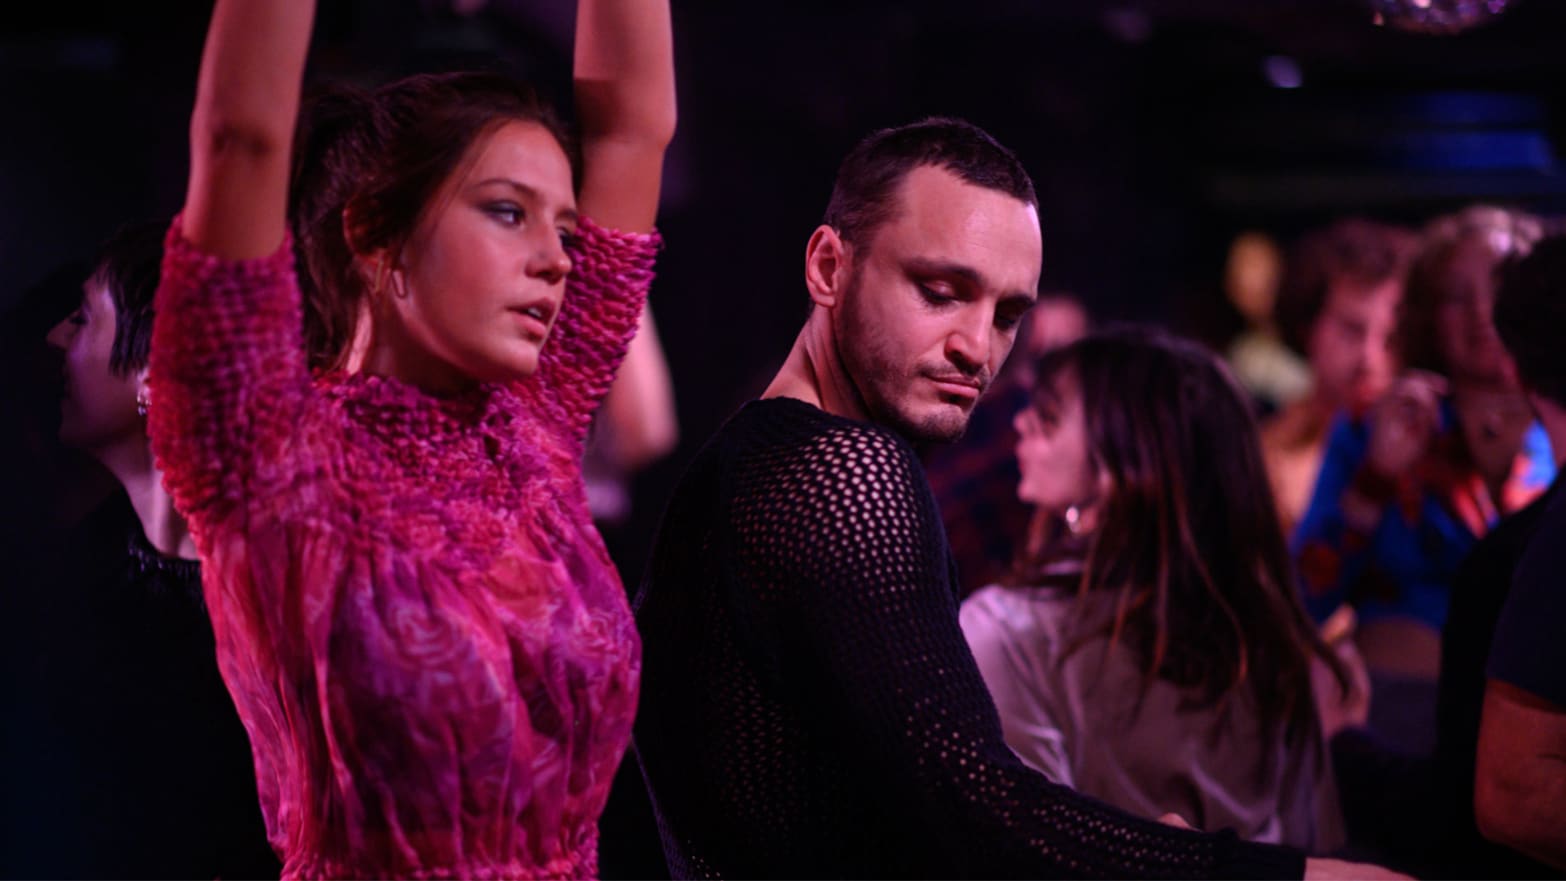 A production still of Franz Rogowski and Adèle Exarchopoulos in Passages.